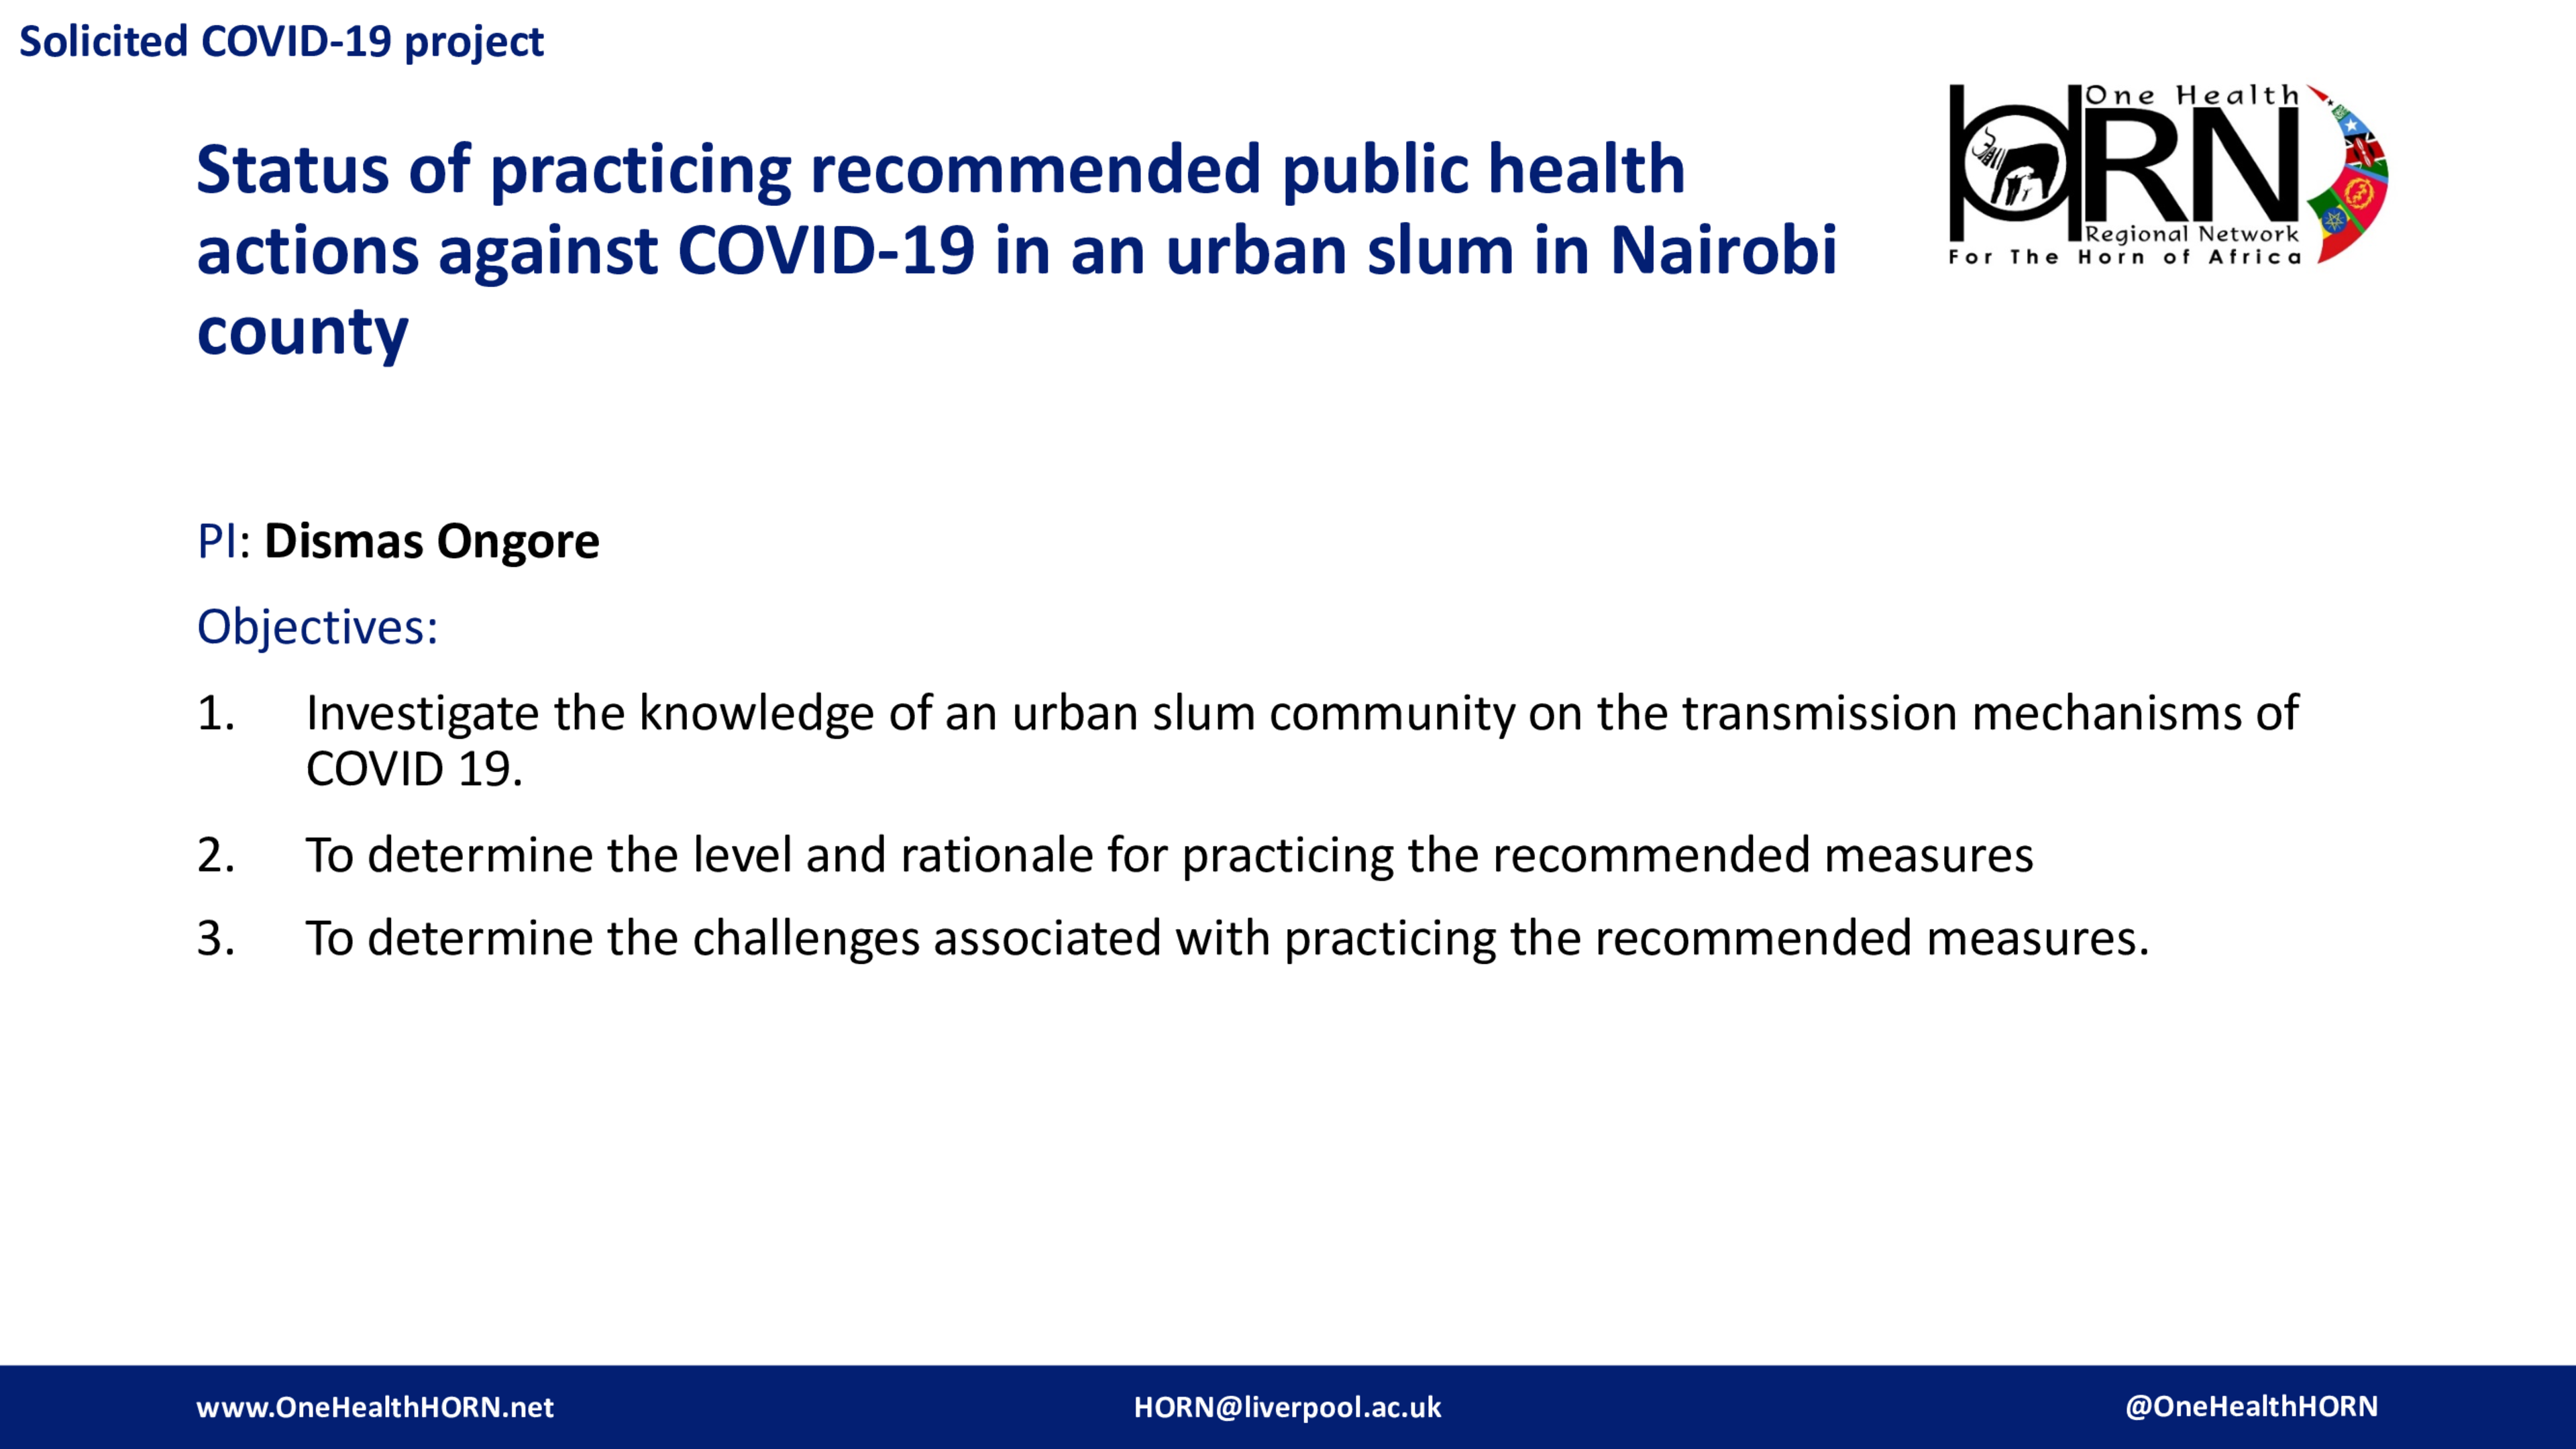 Status of practicing recommended public health actions against COVID-19 in an urban slum in Nairobi county